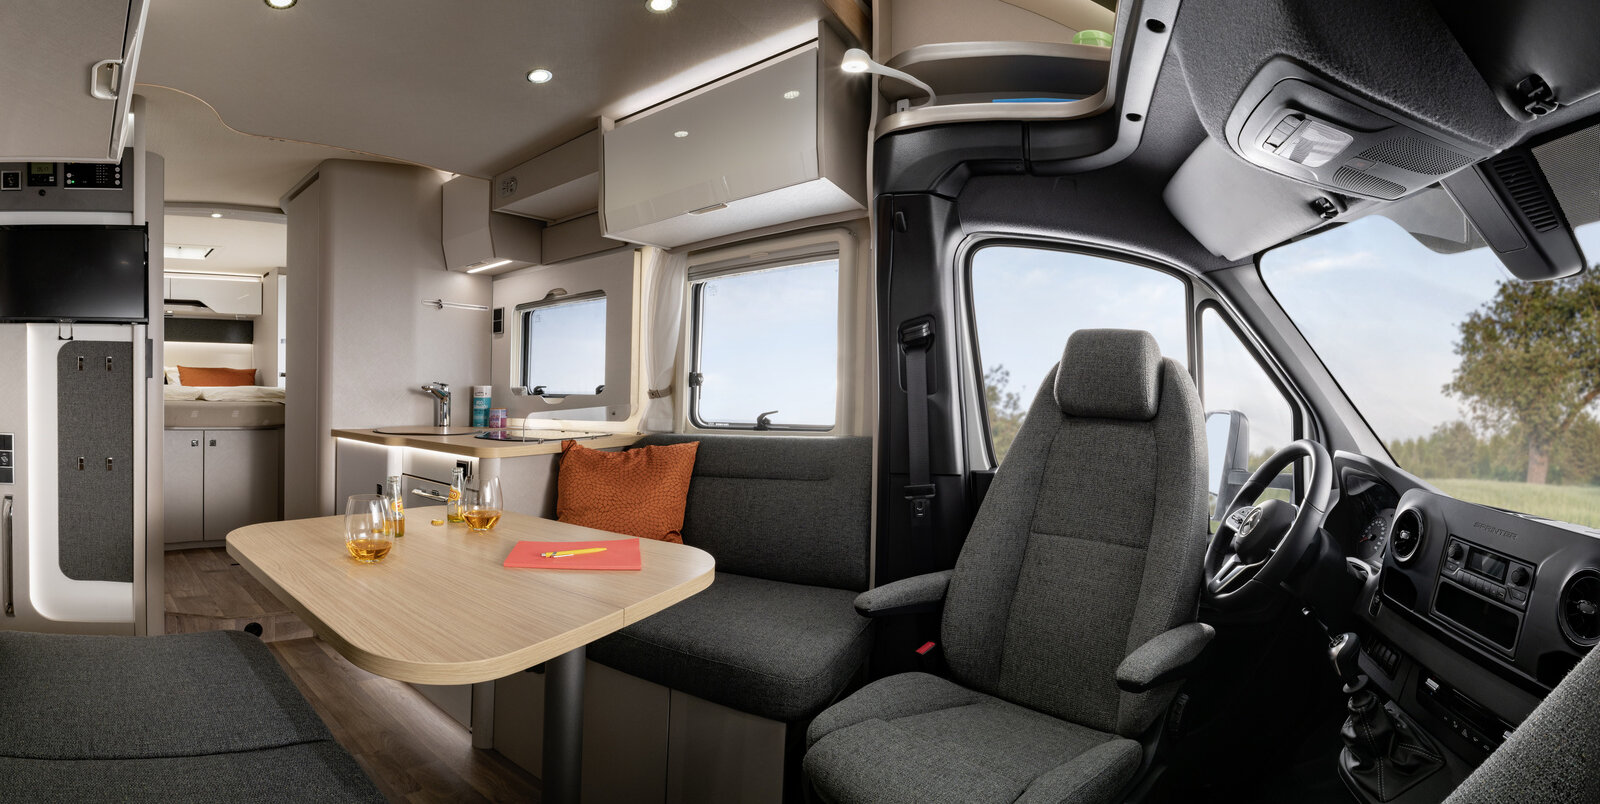 Living room in the HYMER T-Class S 695: driver's cab, seating area with a laid table, kitchen, bathroom and sleeping area